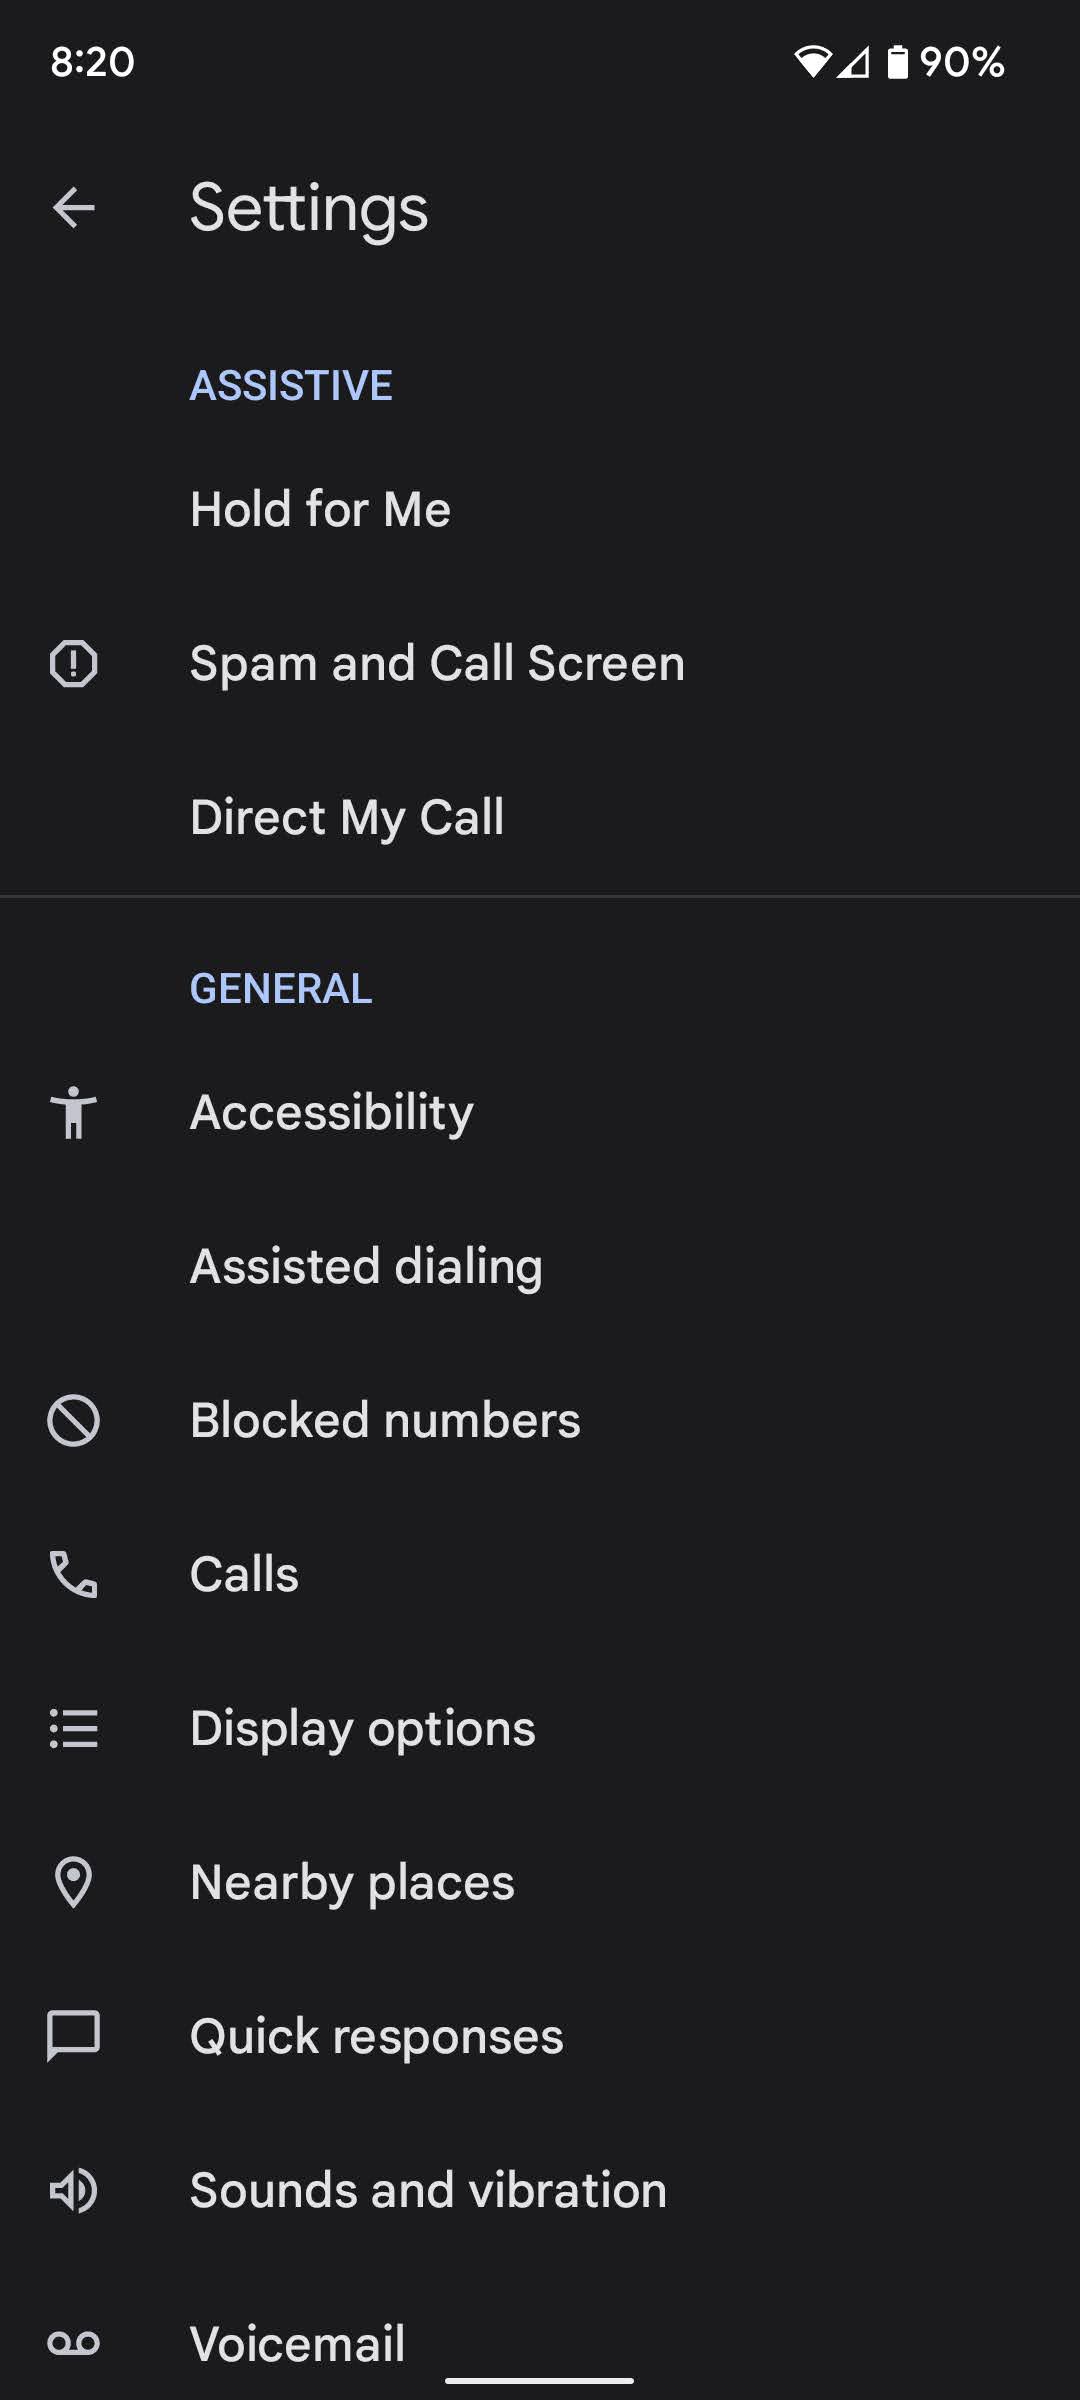 Tap on “Spam and Call Screen.”